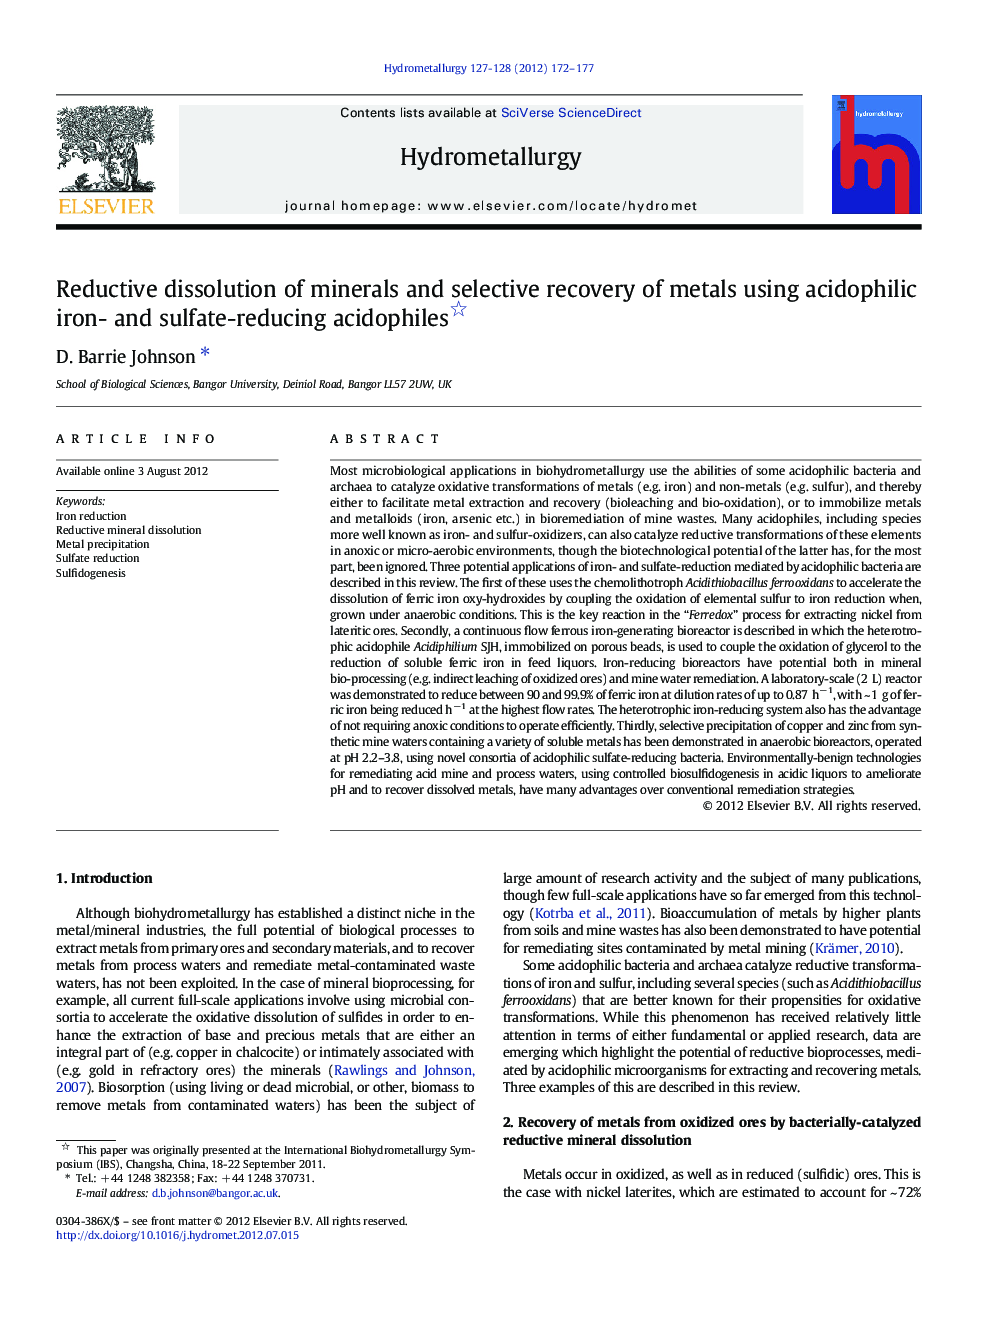 Reductive dissolution of minerals and selective recovery of metals using acidophilic iron- and sulfate-reducing acidophiles 